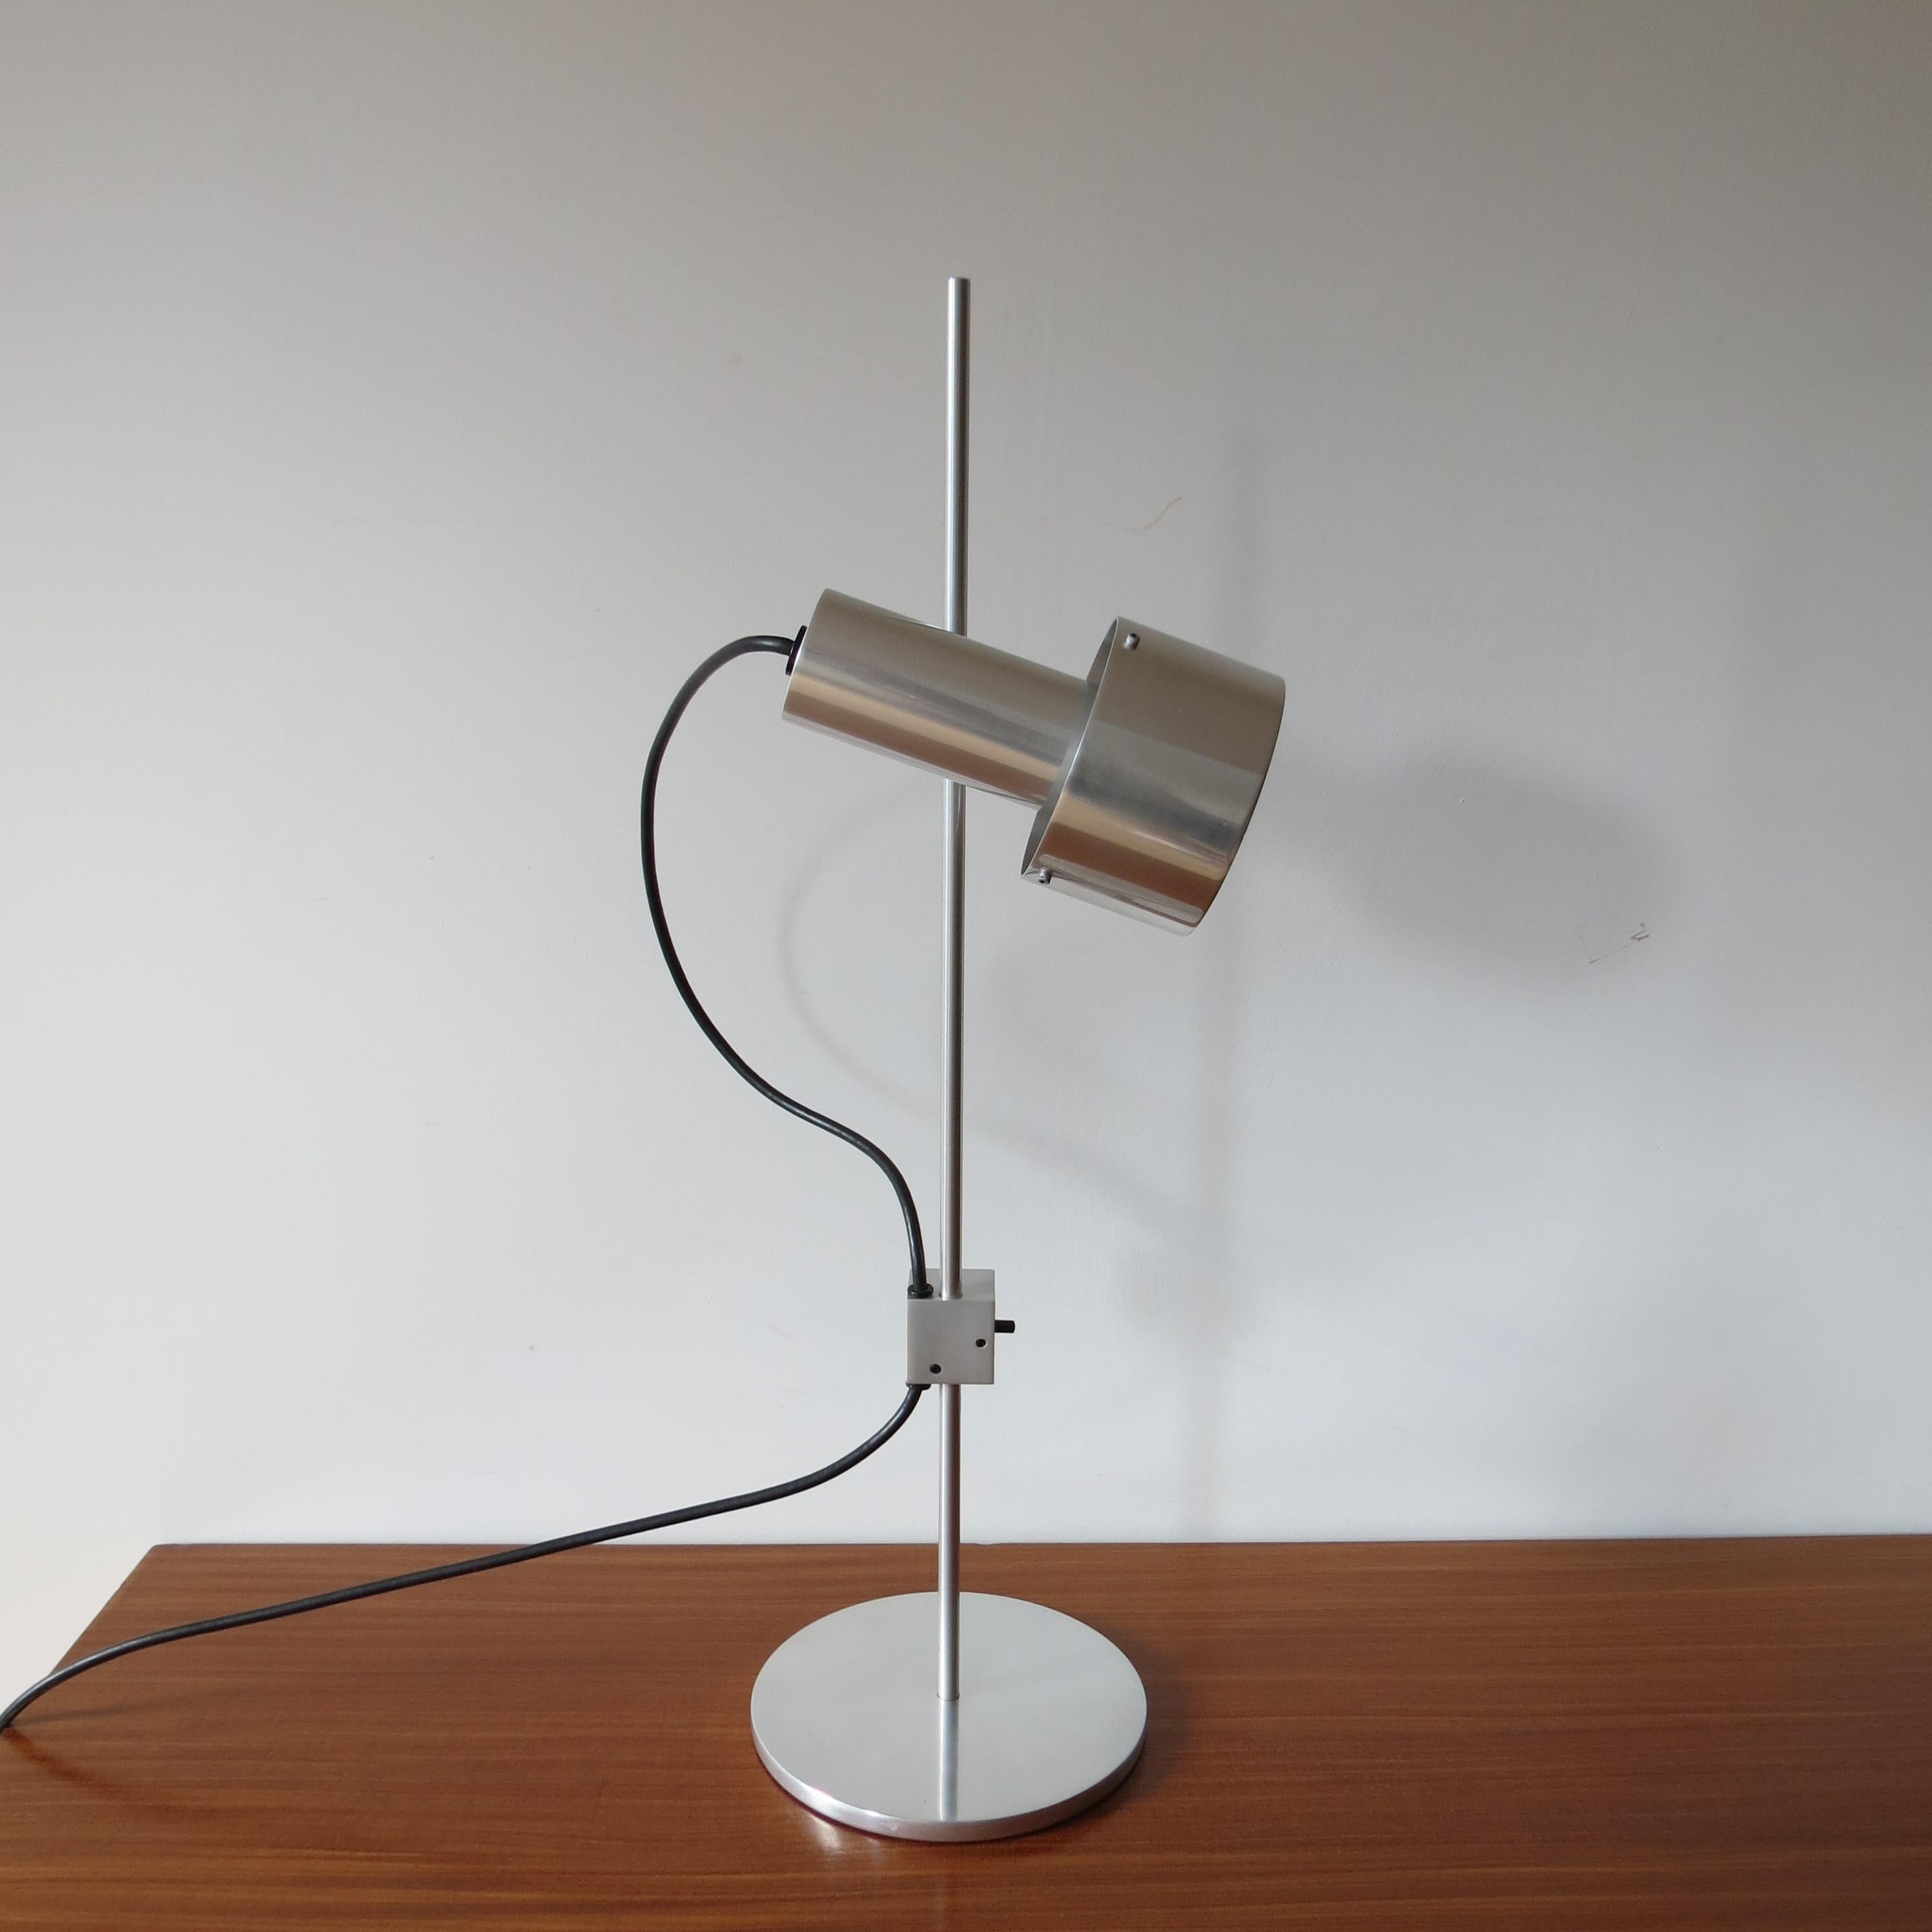 Peter Nelson Aluminium Single Spot Desk Lamp early 1960s-3  available

Wonderful desk lamp designed by Peter Nelson and produced by Architectural Lighting Ltd. With a single spot light, fully adjustable lamp which moves up and down the rod and also